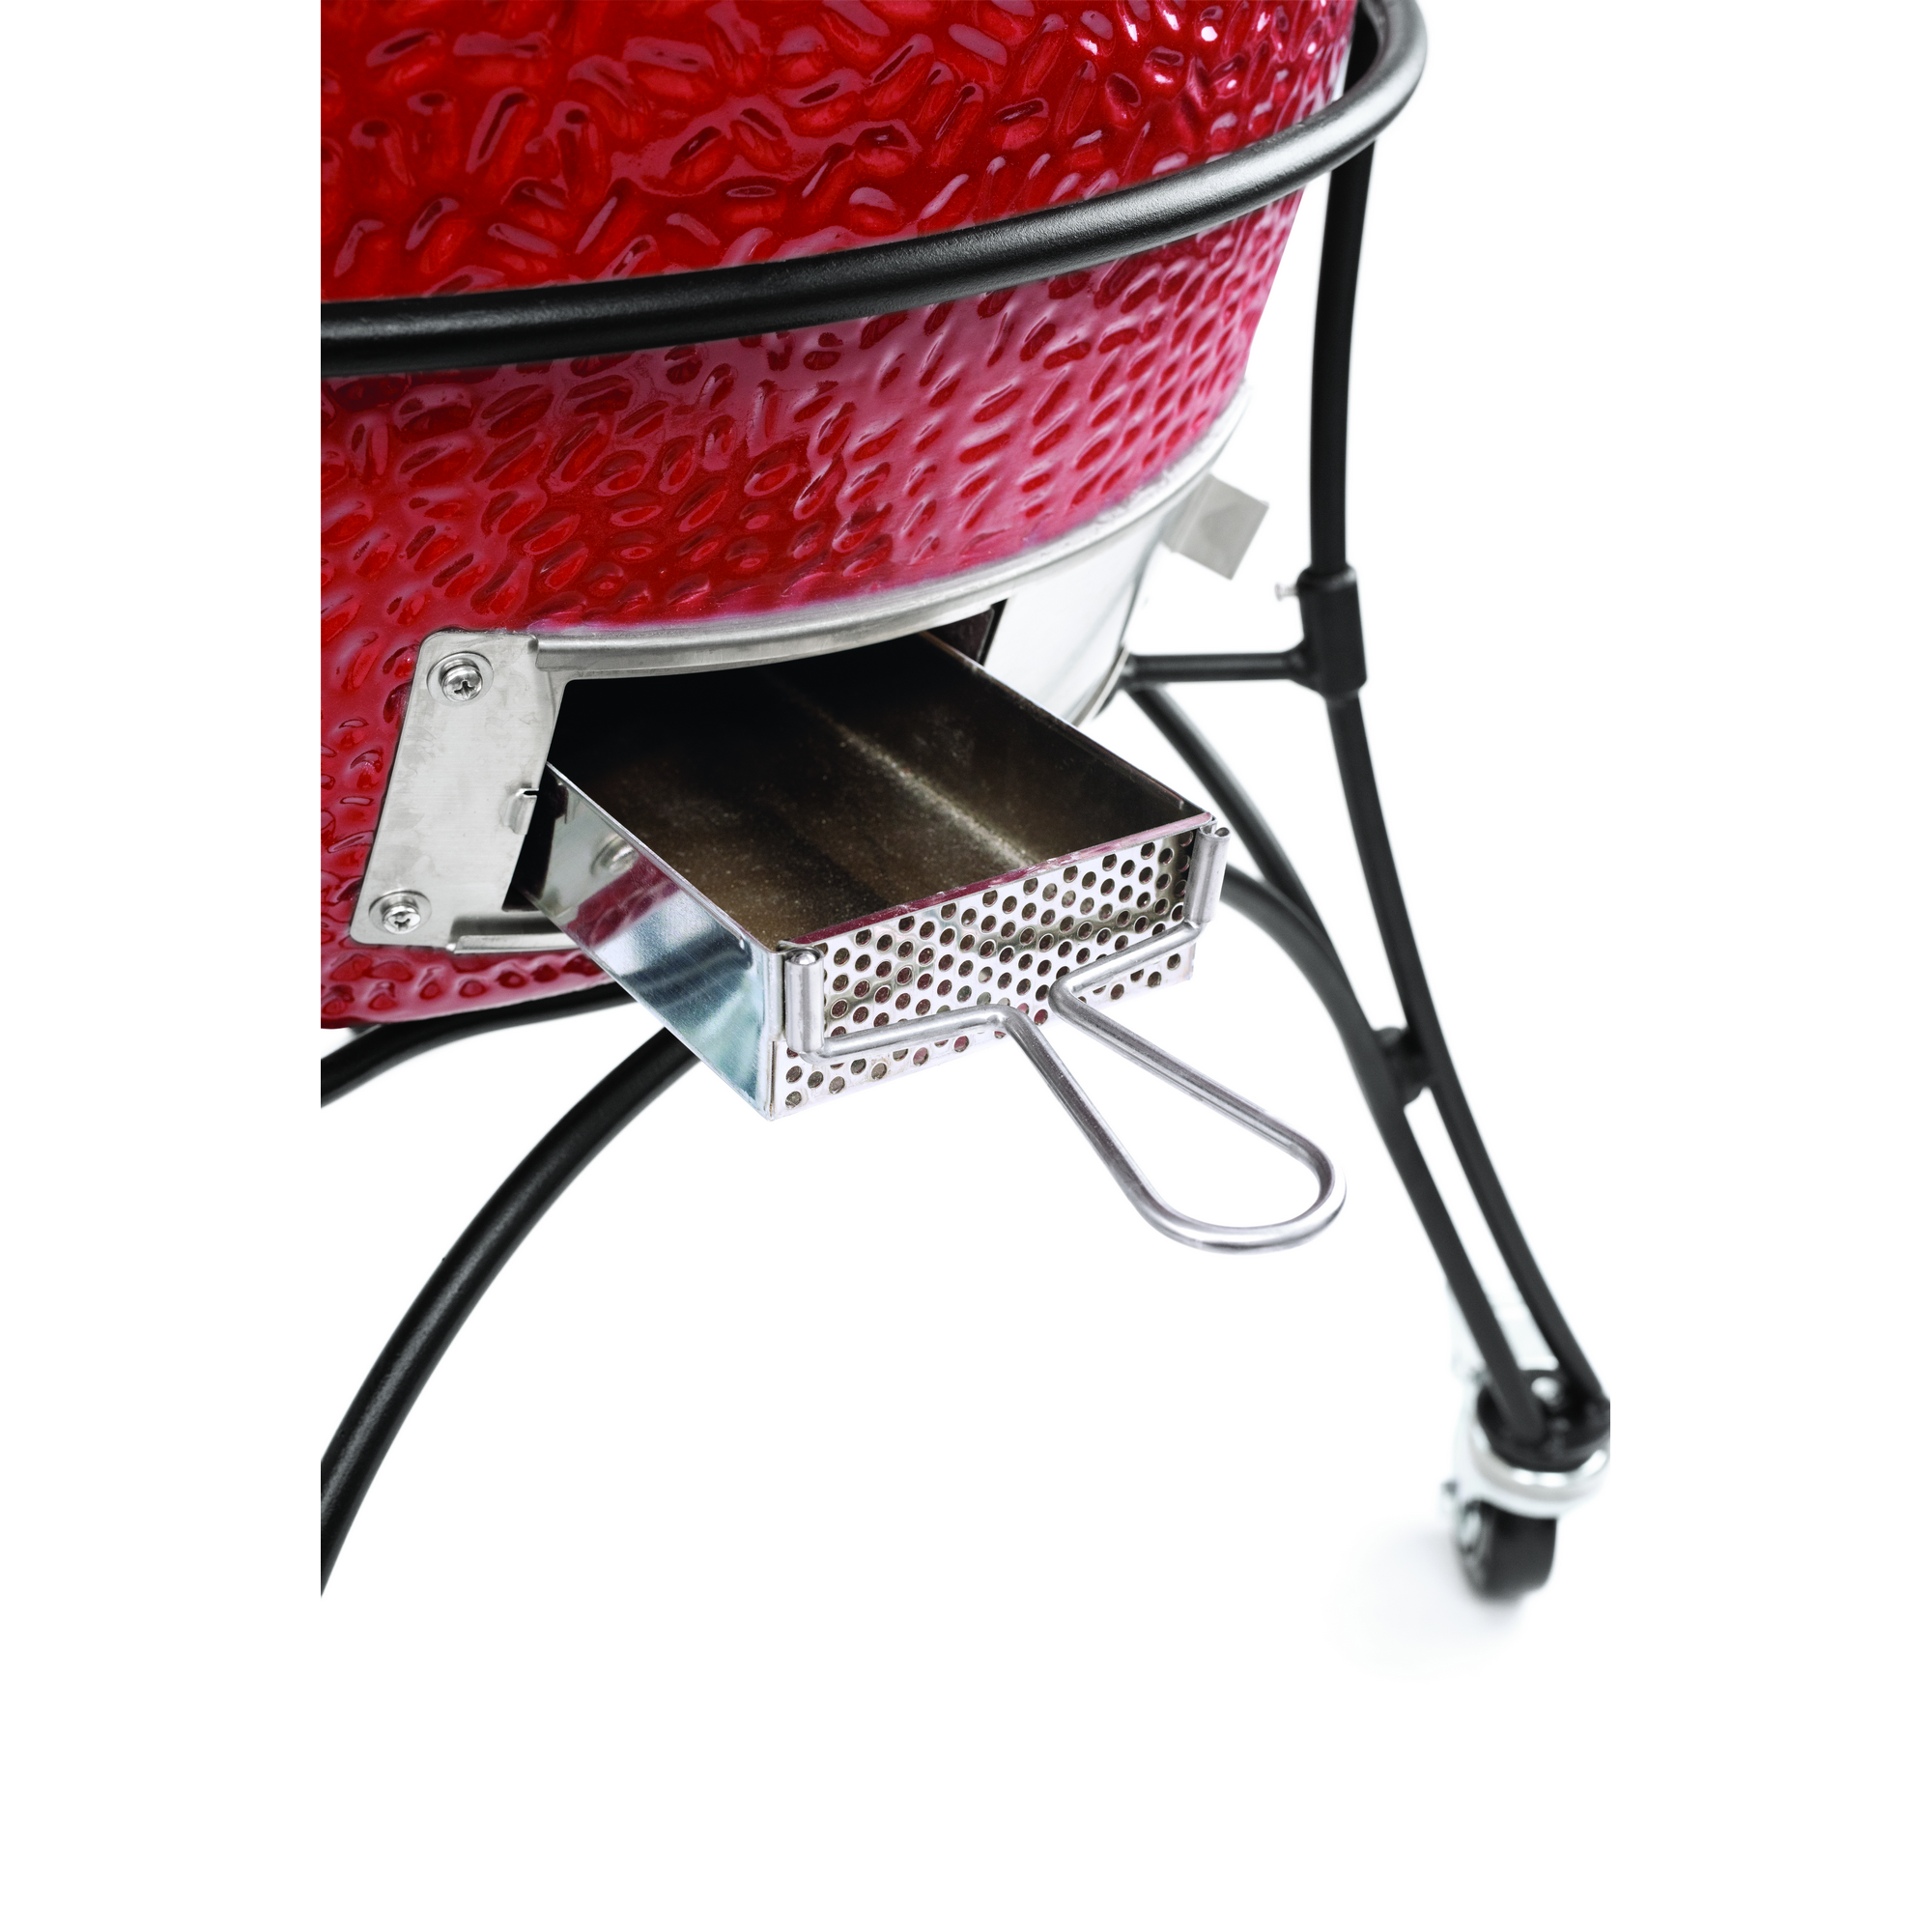 Keramikgrill 'Classic II' rot/schwarz Ø 46 cm, mit Thermometer + product picture